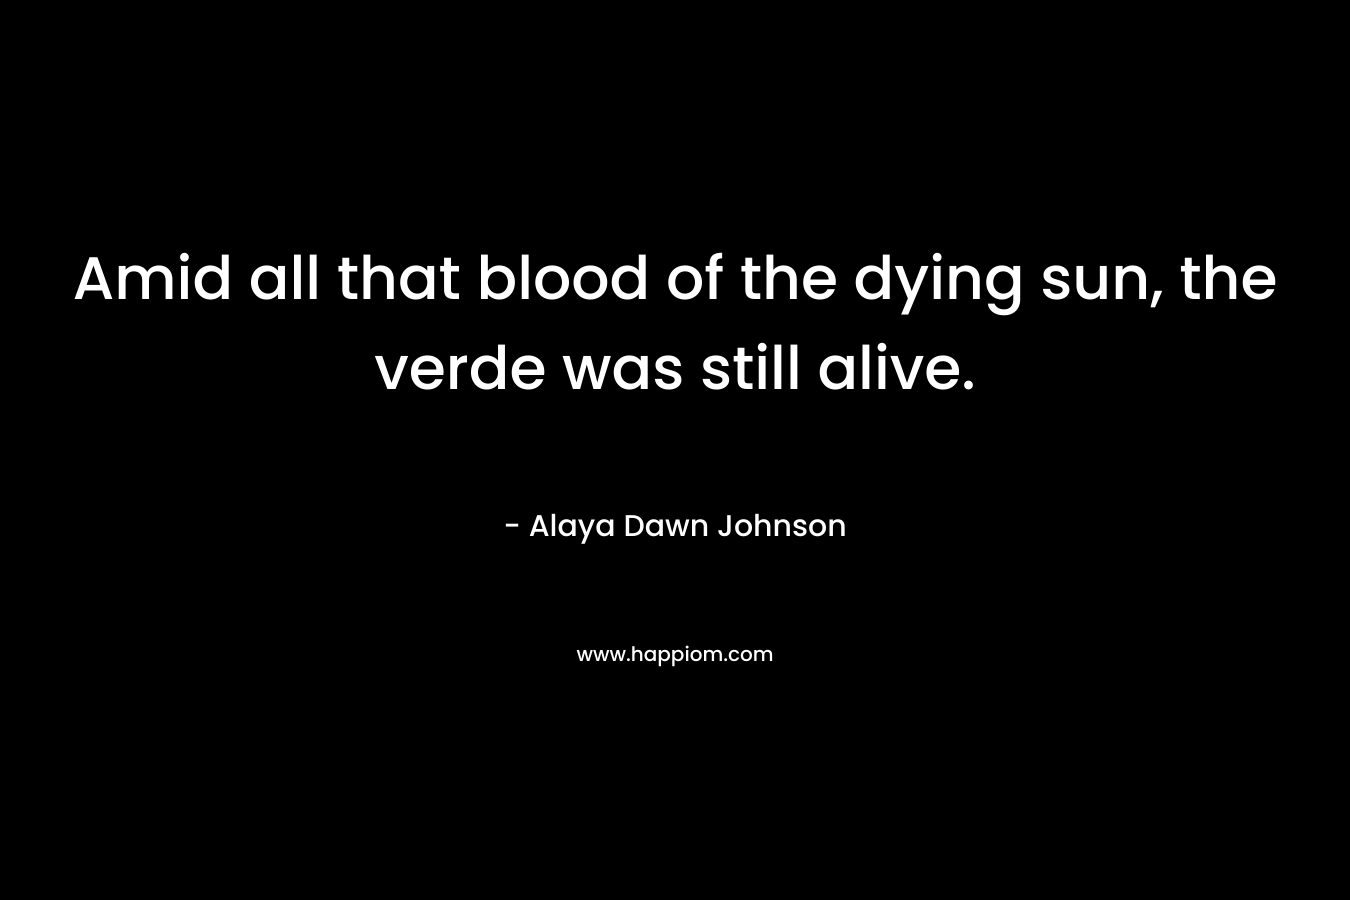 Amid all that blood of the dying sun, the verde was still alive. – Alaya Dawn Johnson